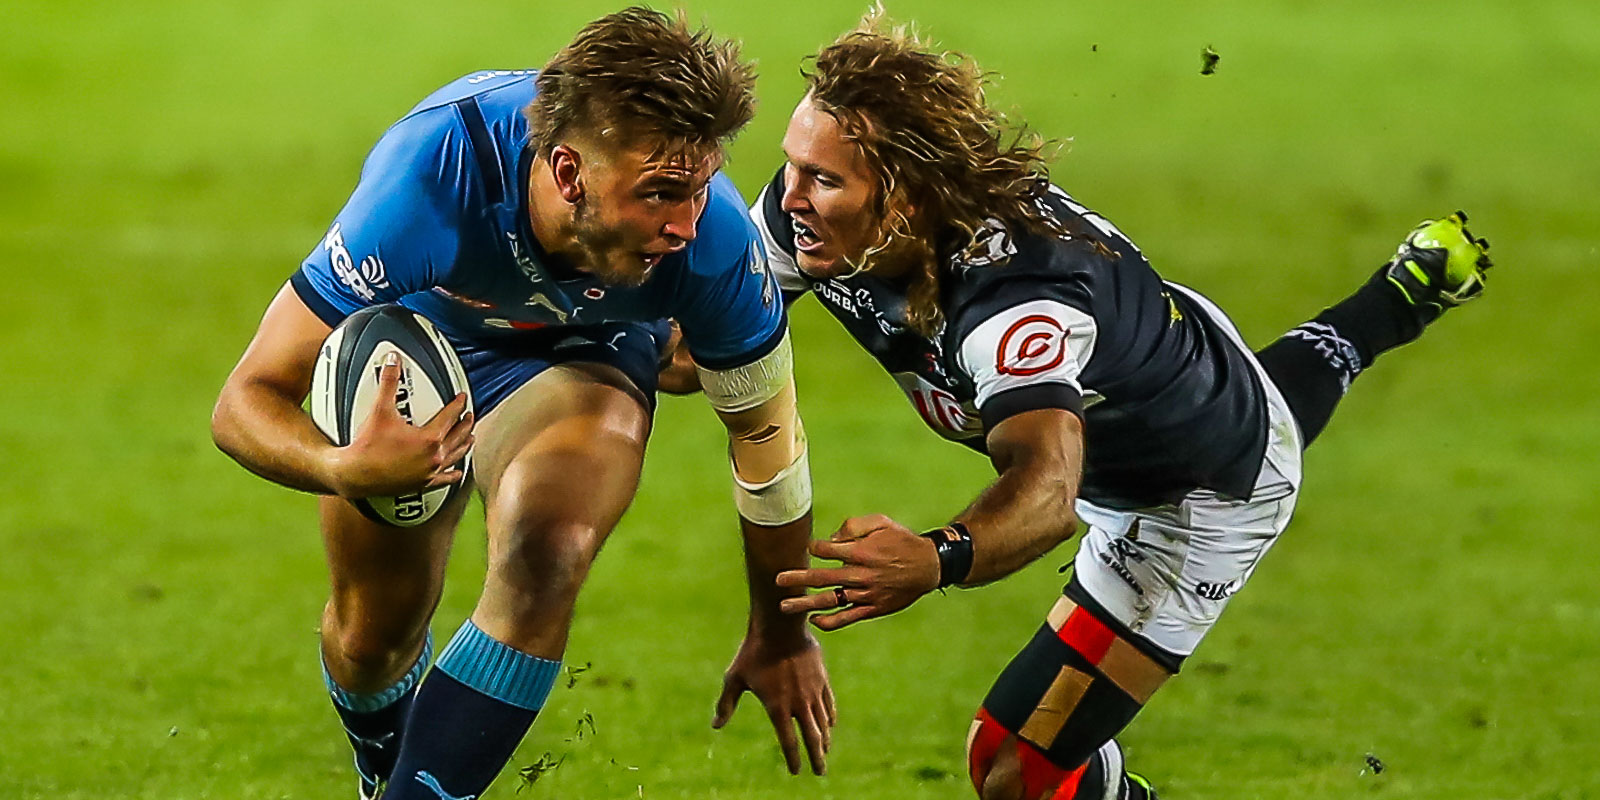 The Vodacom Bulls and Cell C Sharks square off in a replay of the Carling Currie Cup Finals for 2020 and 2021.